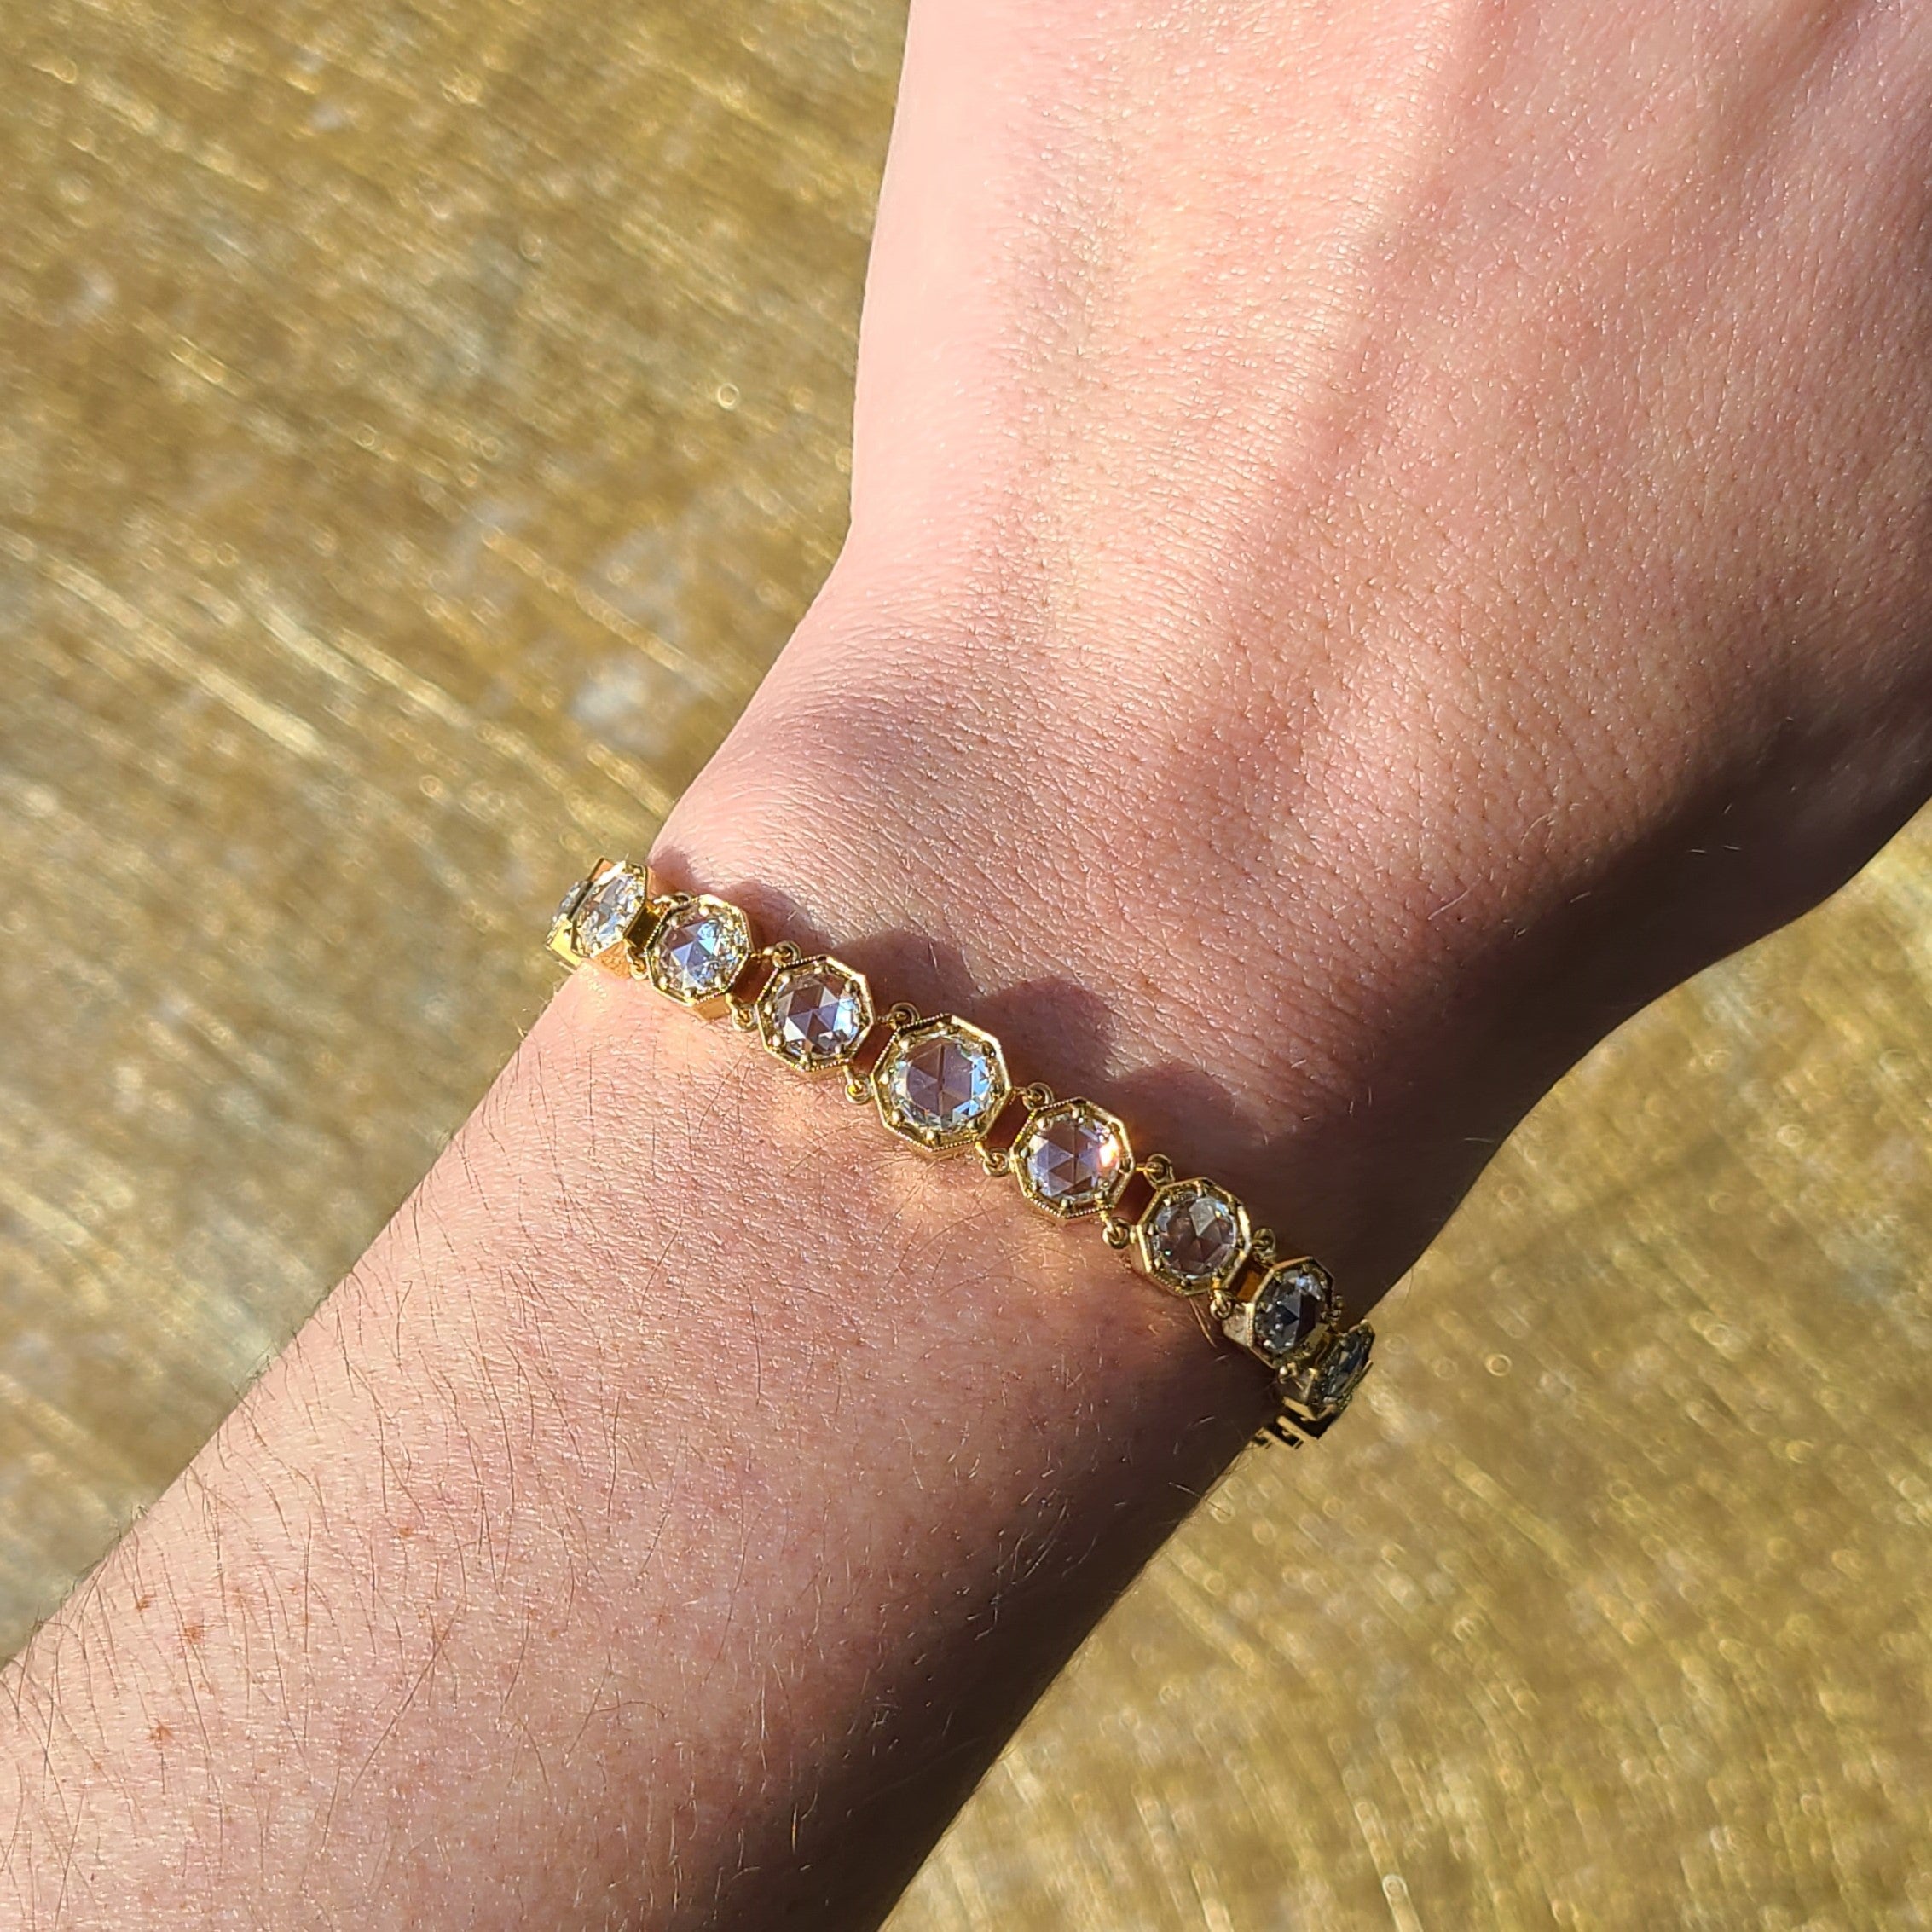 SINGLE STONE COLBY BRACELET featuring 1.10ct I/SI2 GIA certified round rose cut diamond accompanied by 7.94ctw round rose cut diamonds prong set in a handcrafted 18K yellow gold bracelet. Bracelet measures 7.5".